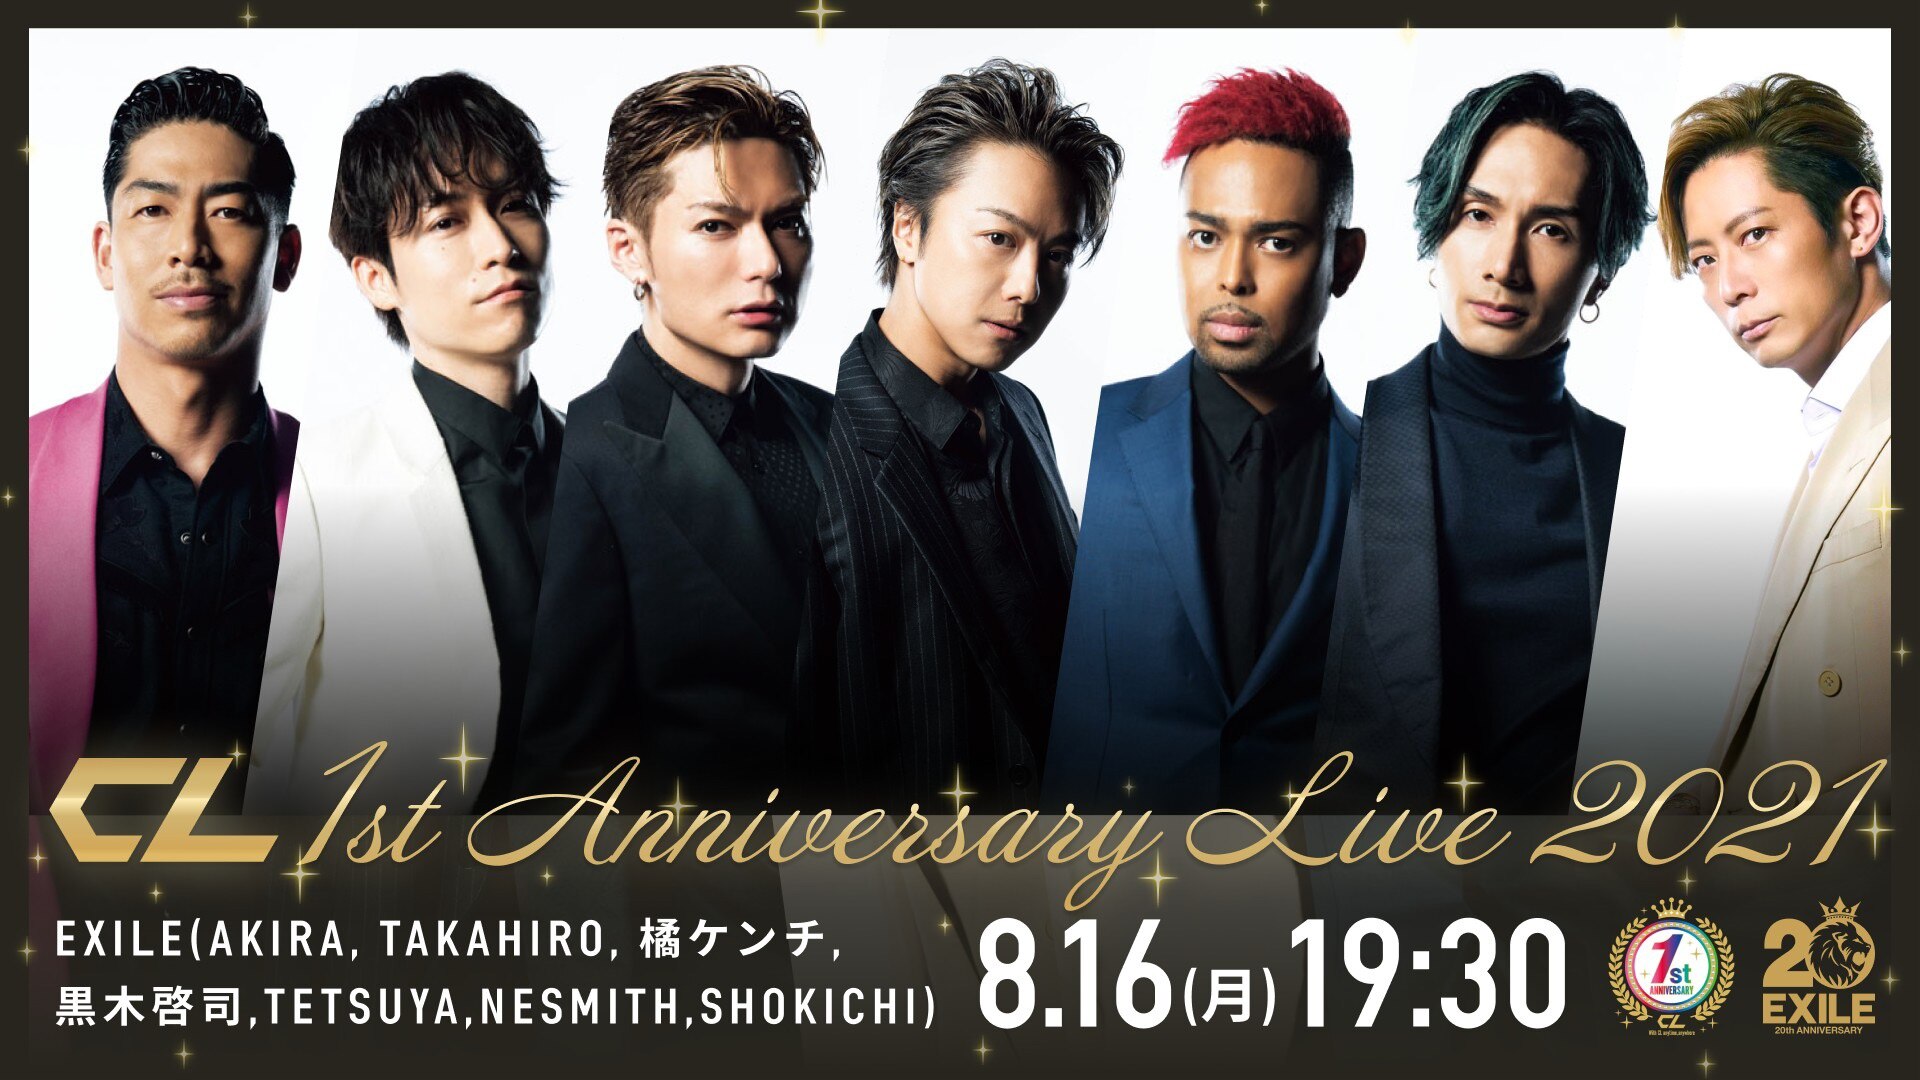 News Cl 1st Anniversary Live 21 8 16 月 19 30より ペイパービュー生配信決定 Exile